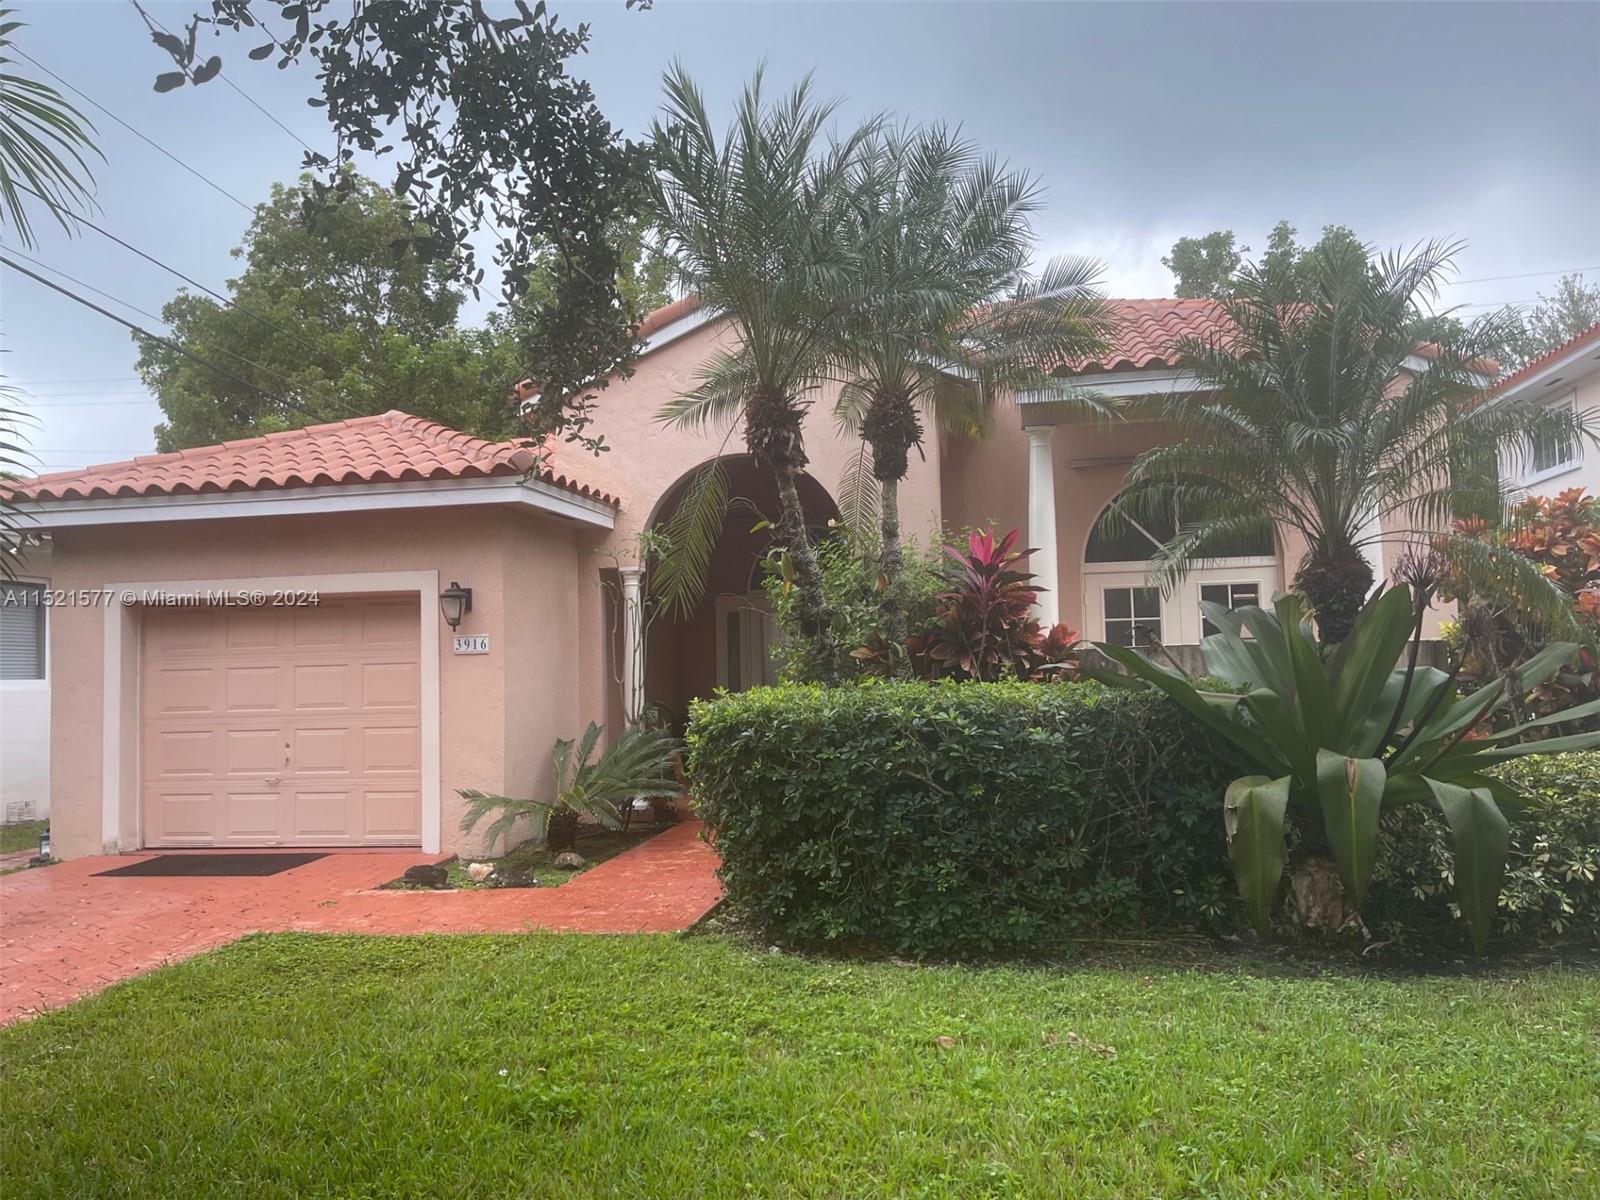 Photo of 3916 Anderson Rd in Coral Gables, FL